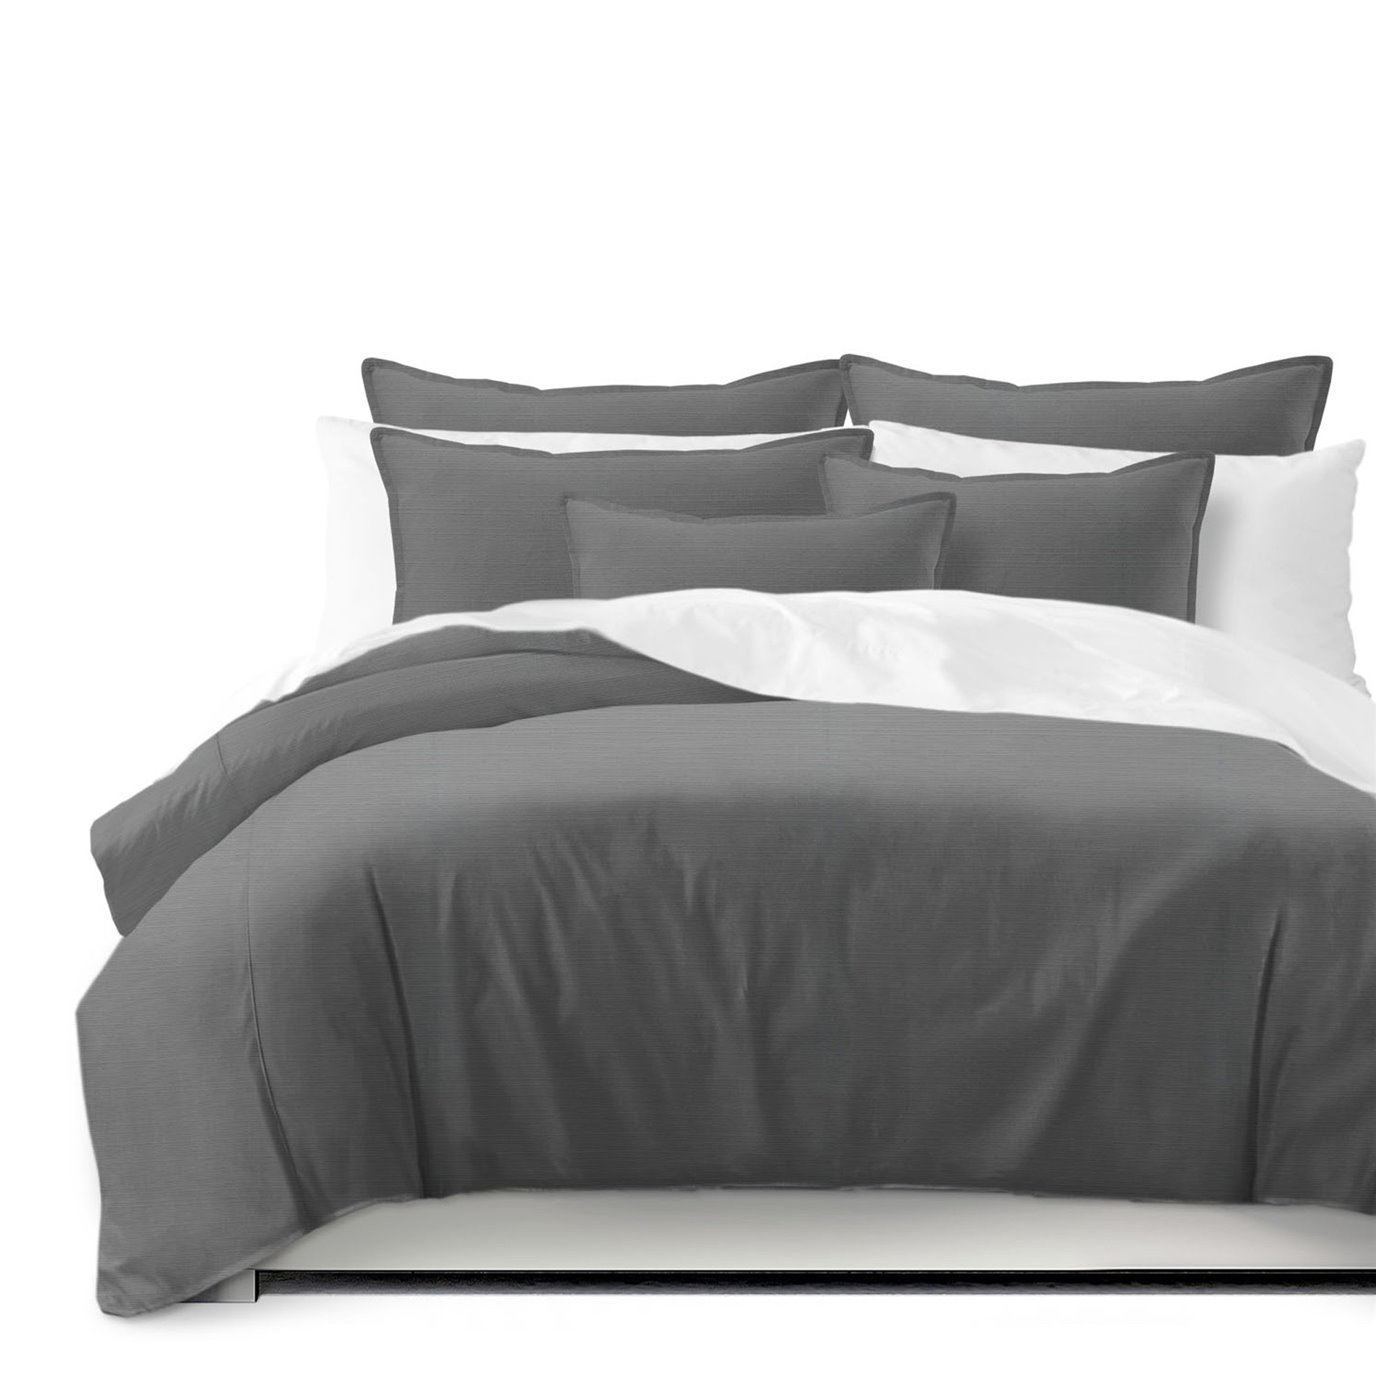 Nova Charcoal Coverlet and Pillow Sham(s) Set - Size Twin